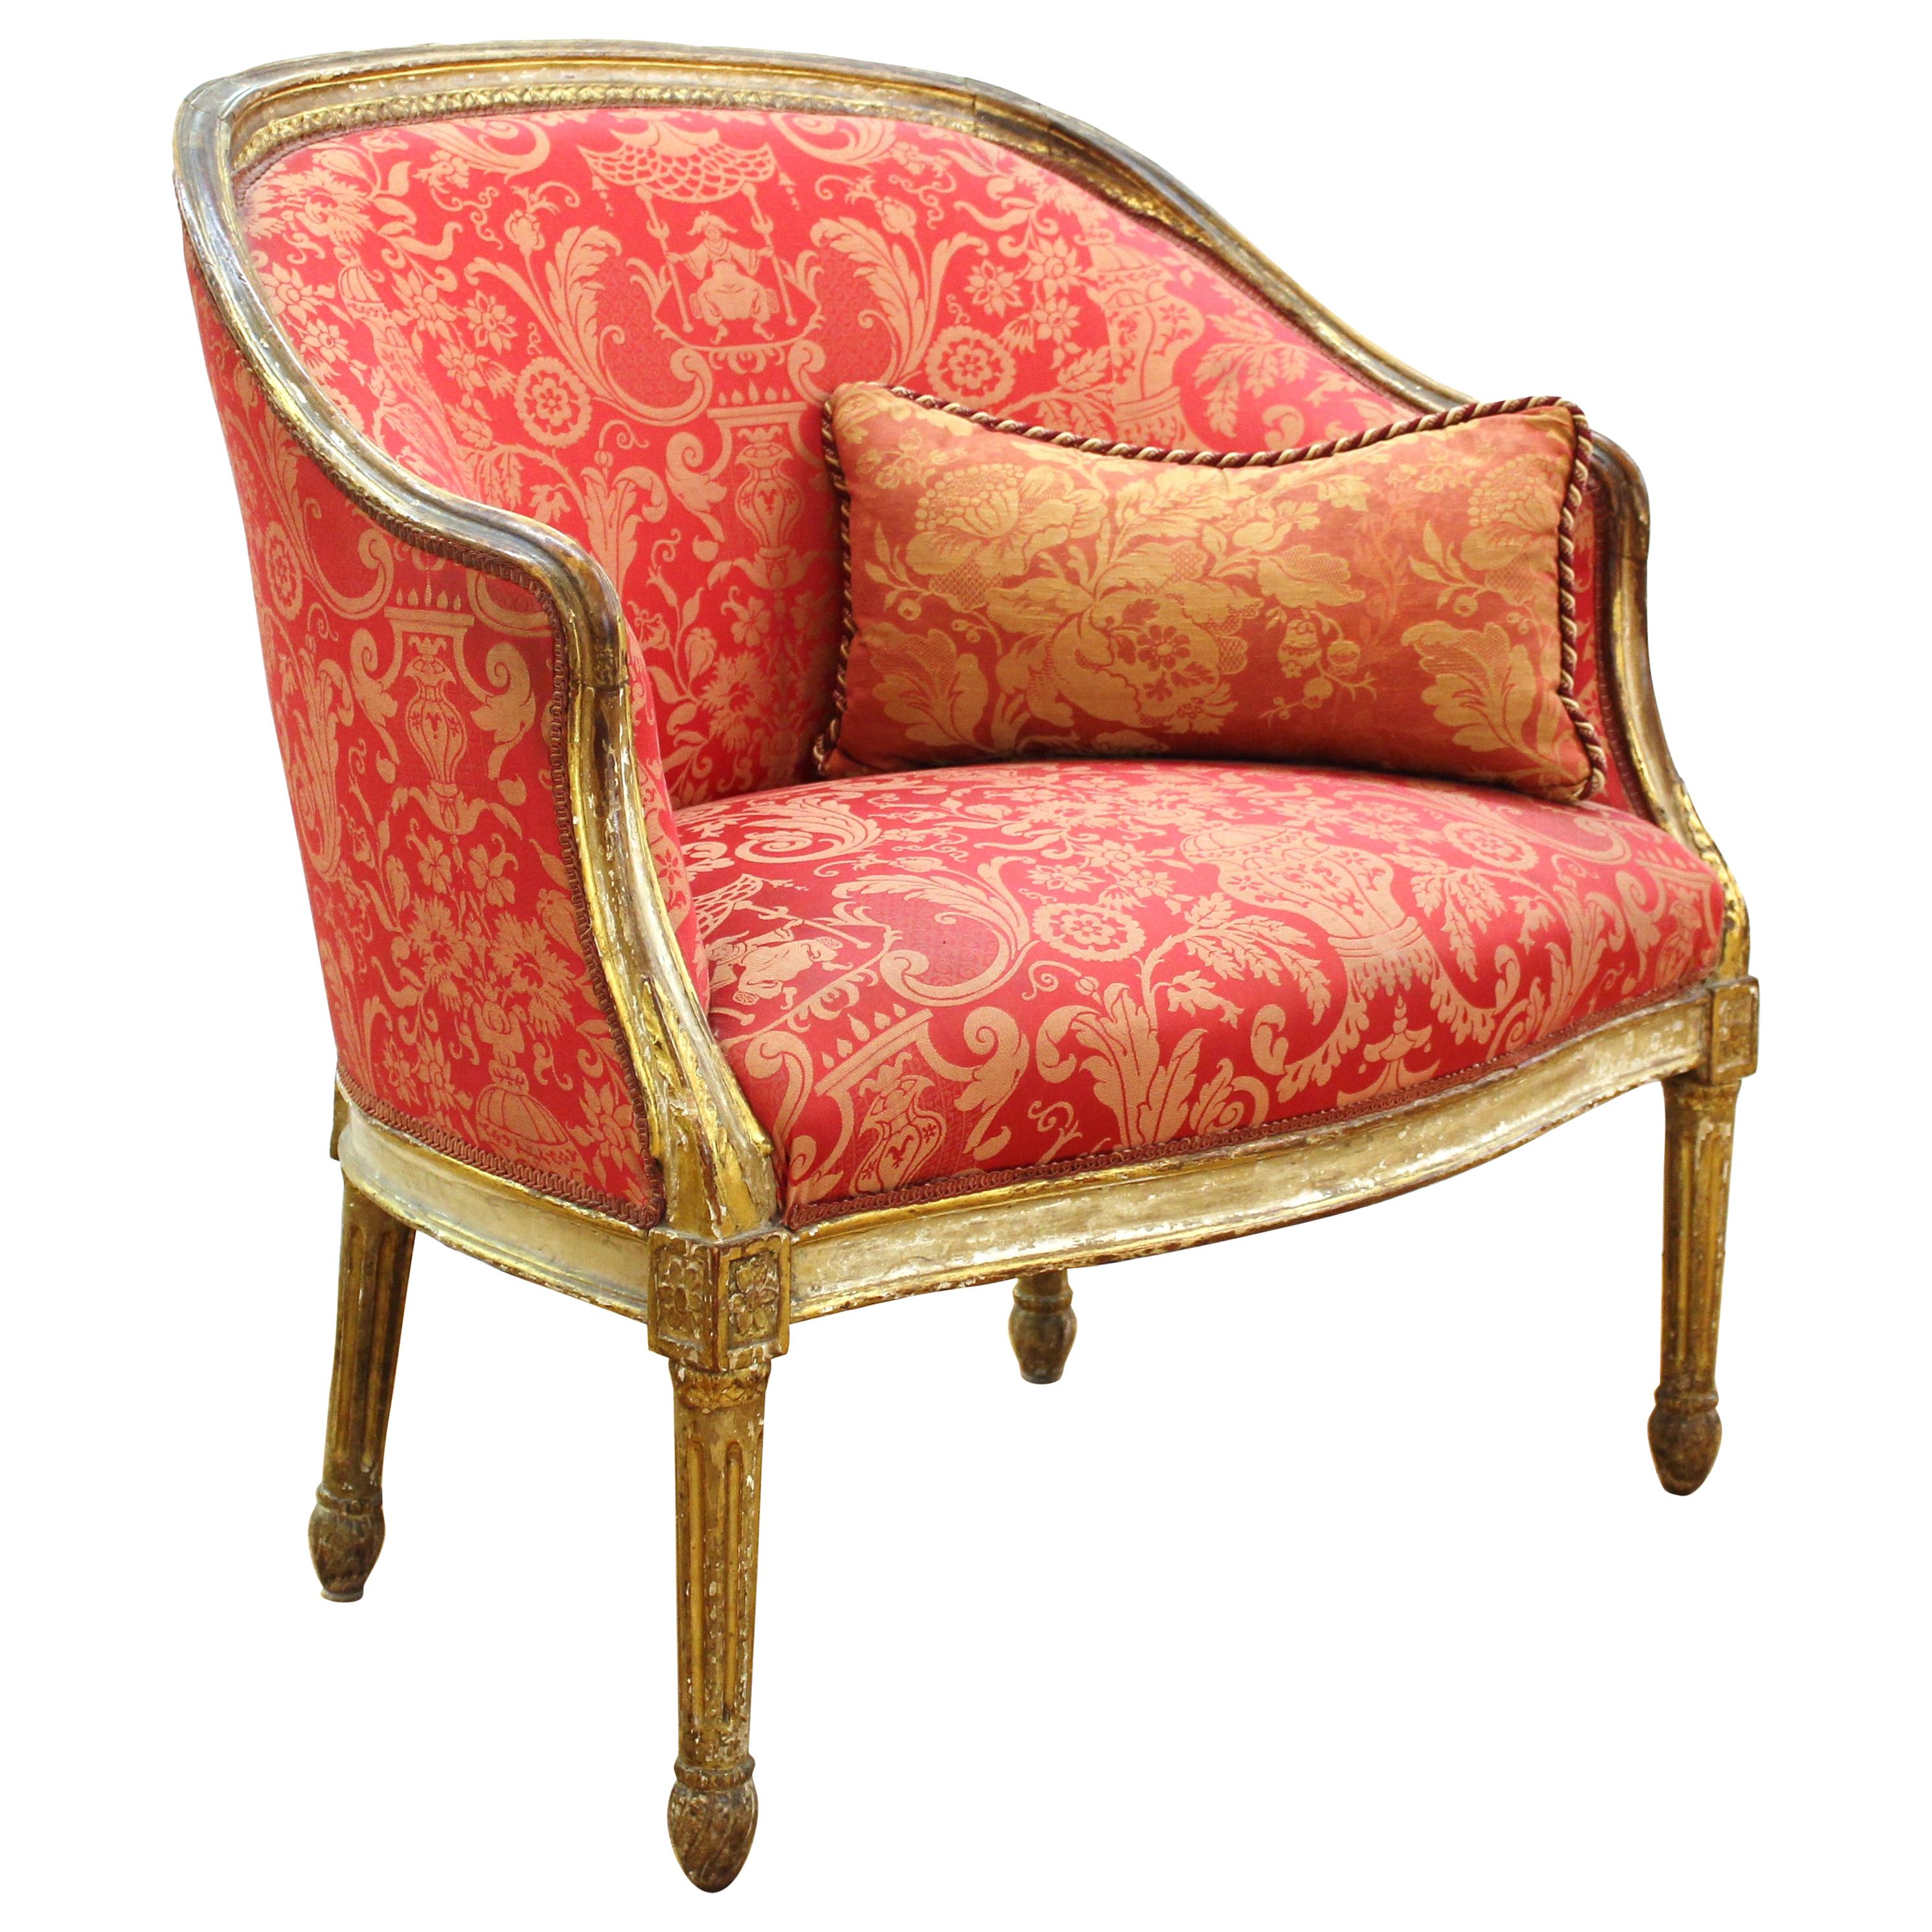 Louis XVI Style Giltwood Fauteuil with Damask Upholstery